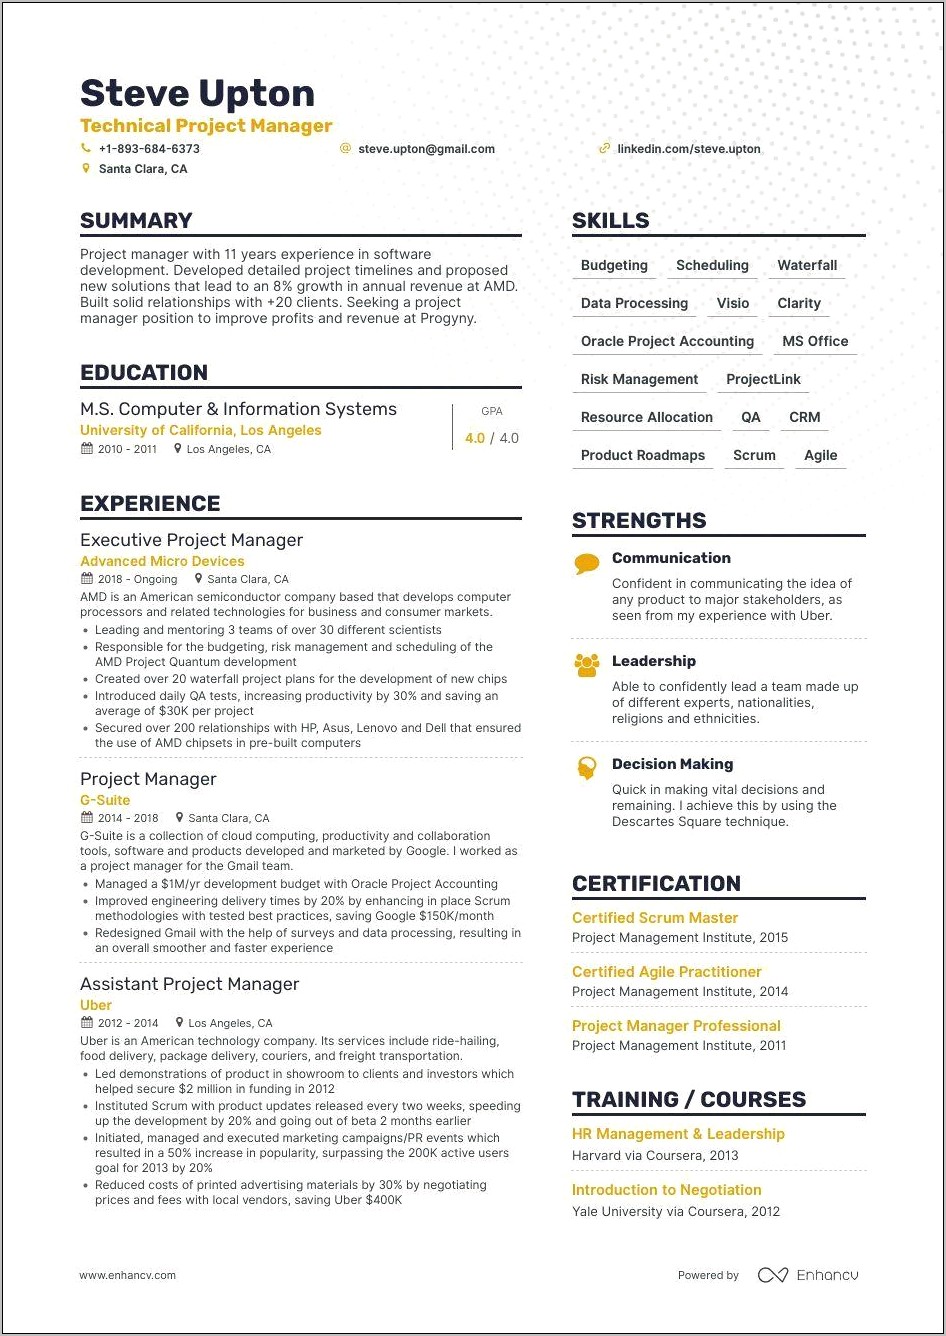 Engineering Project Manager Resume Samples